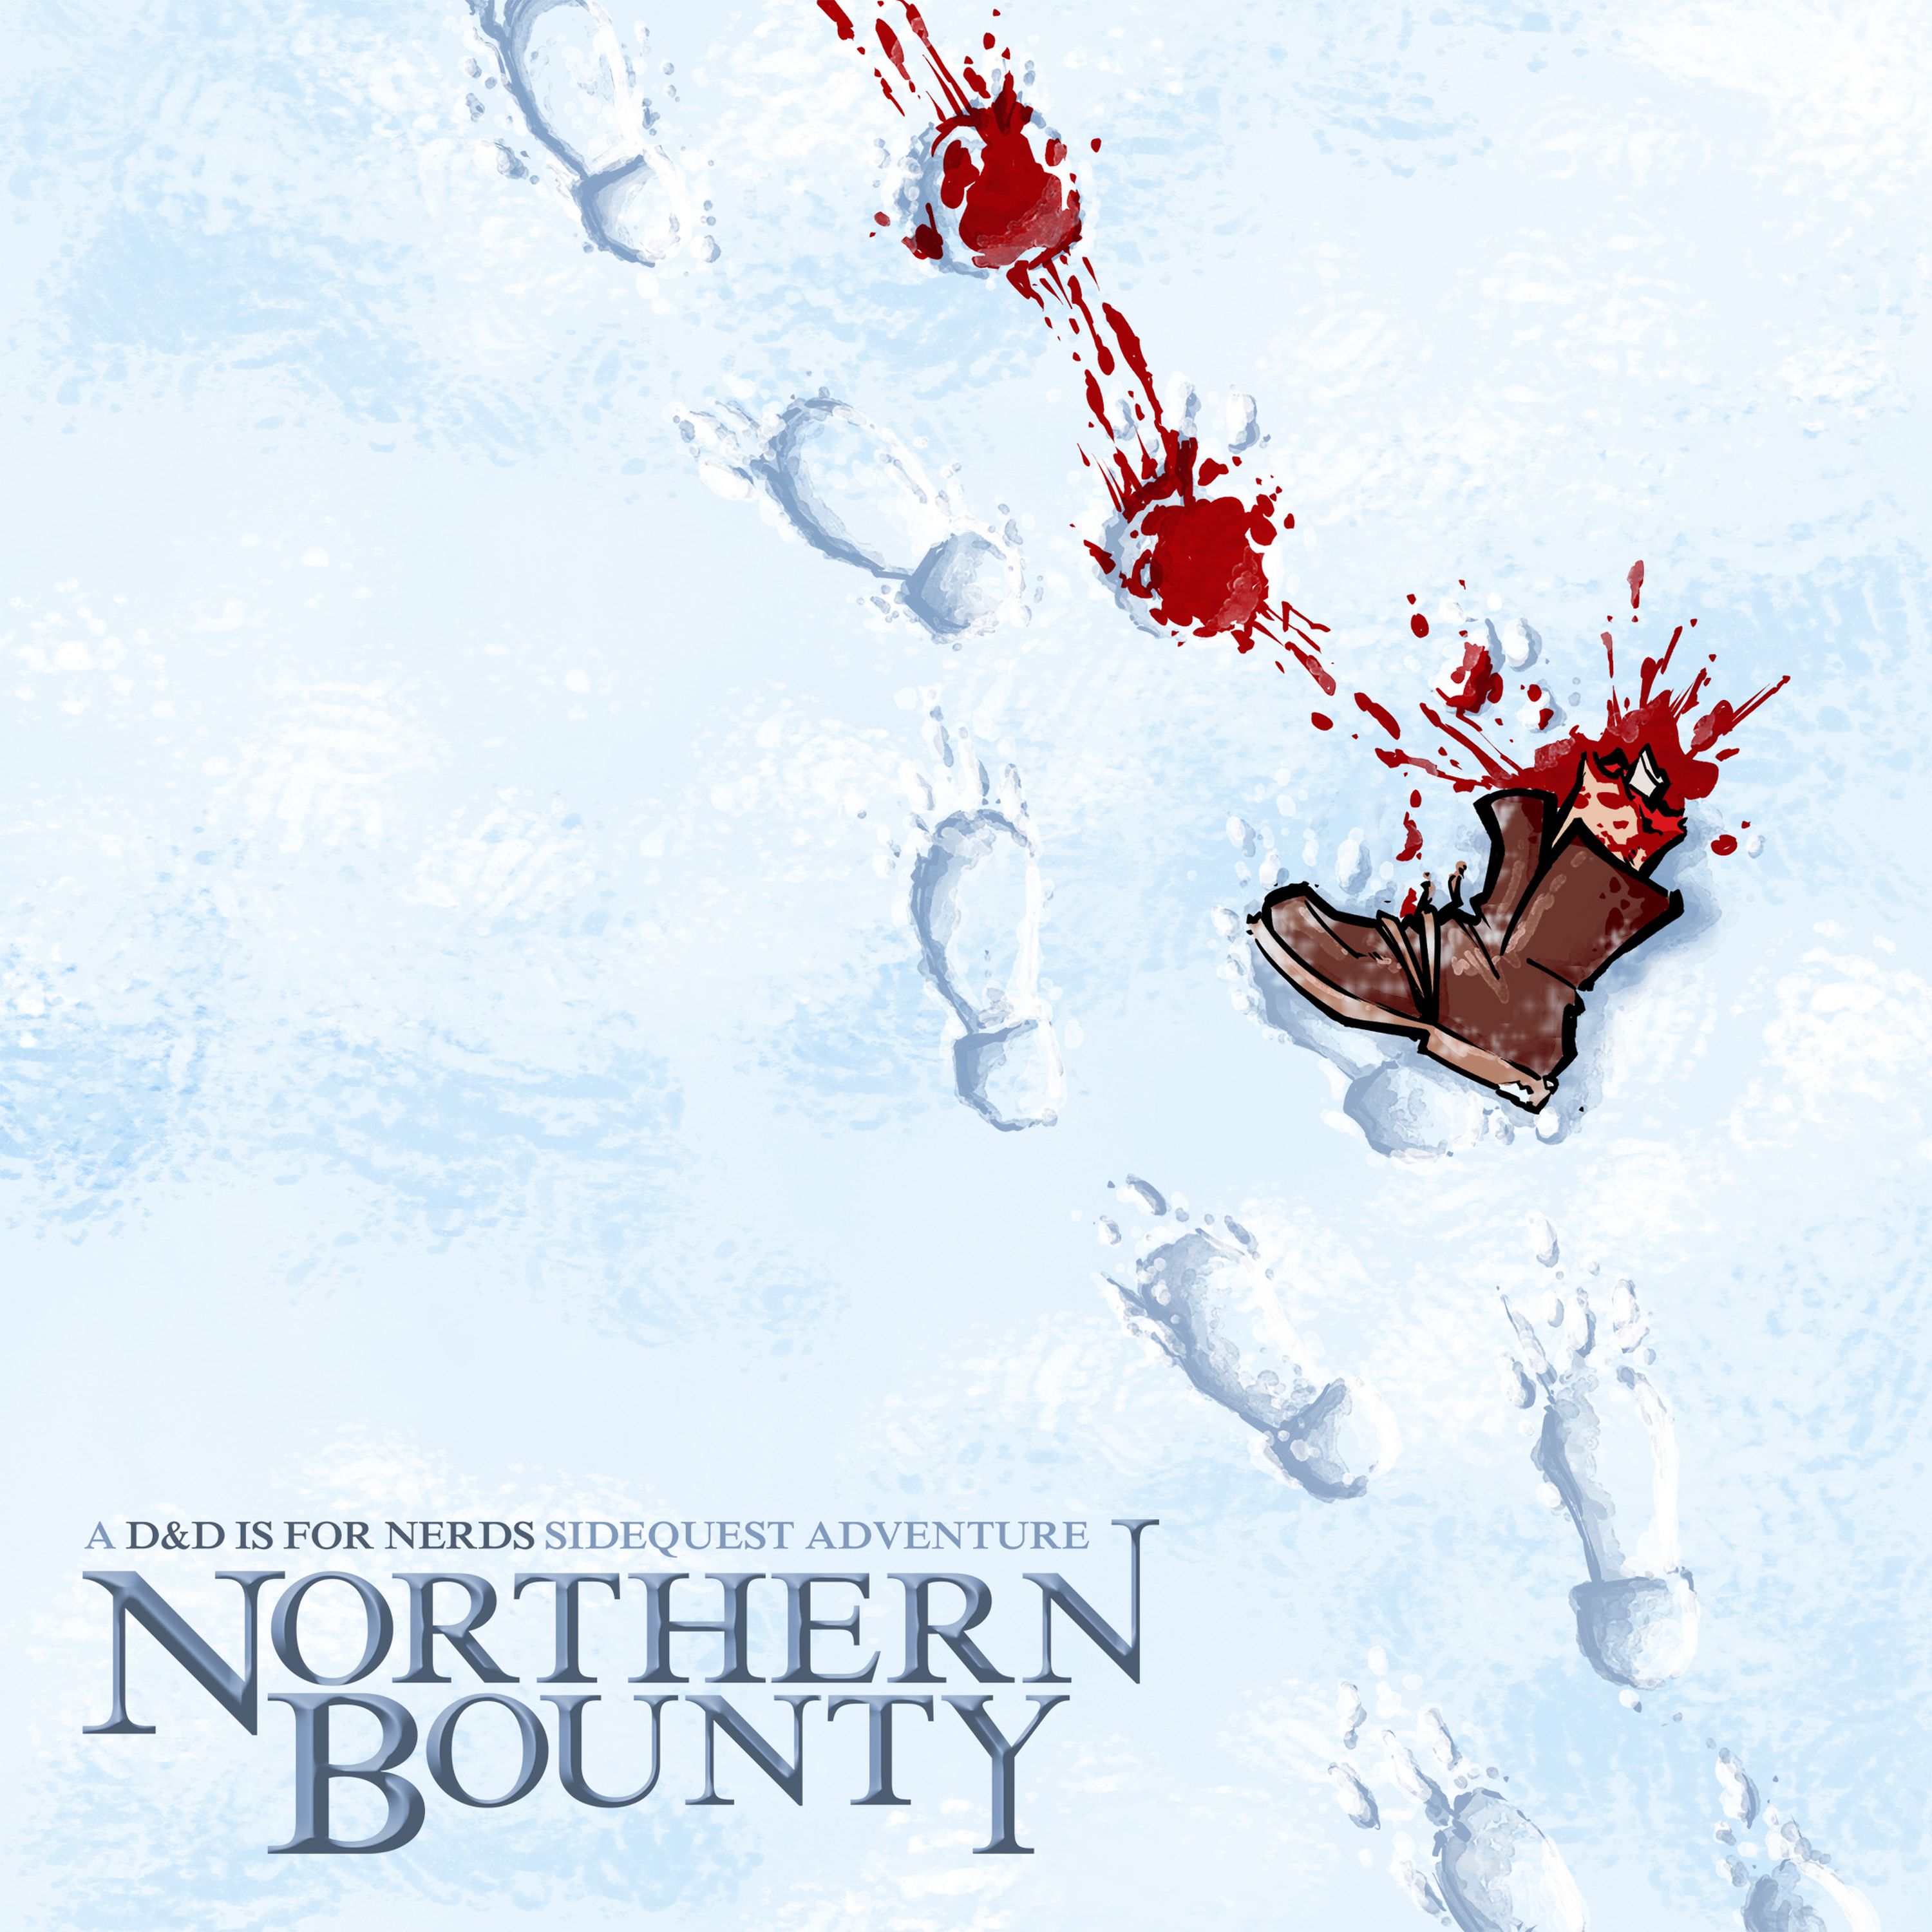 Northern Bounty #9 Offensive Diplomacy